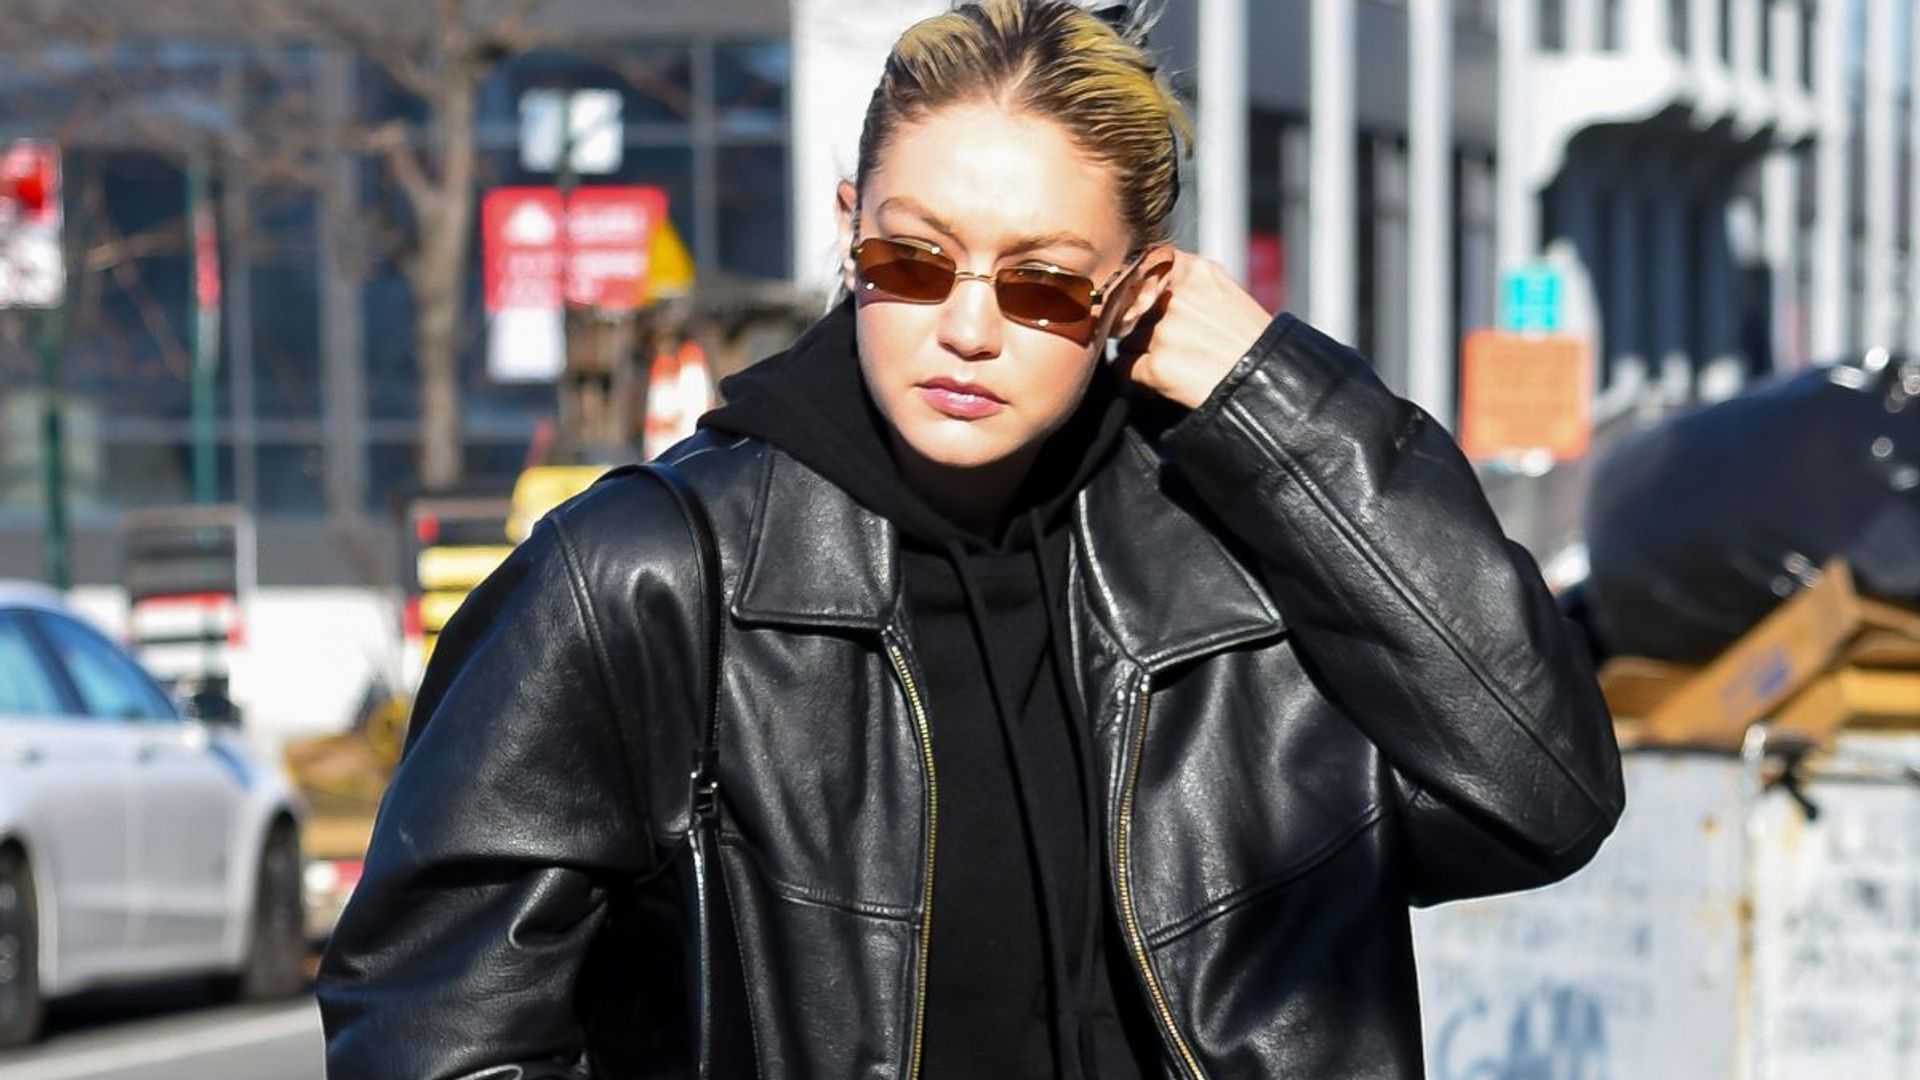 Gigi Hadid just recreated an iconic 90s supermodel look